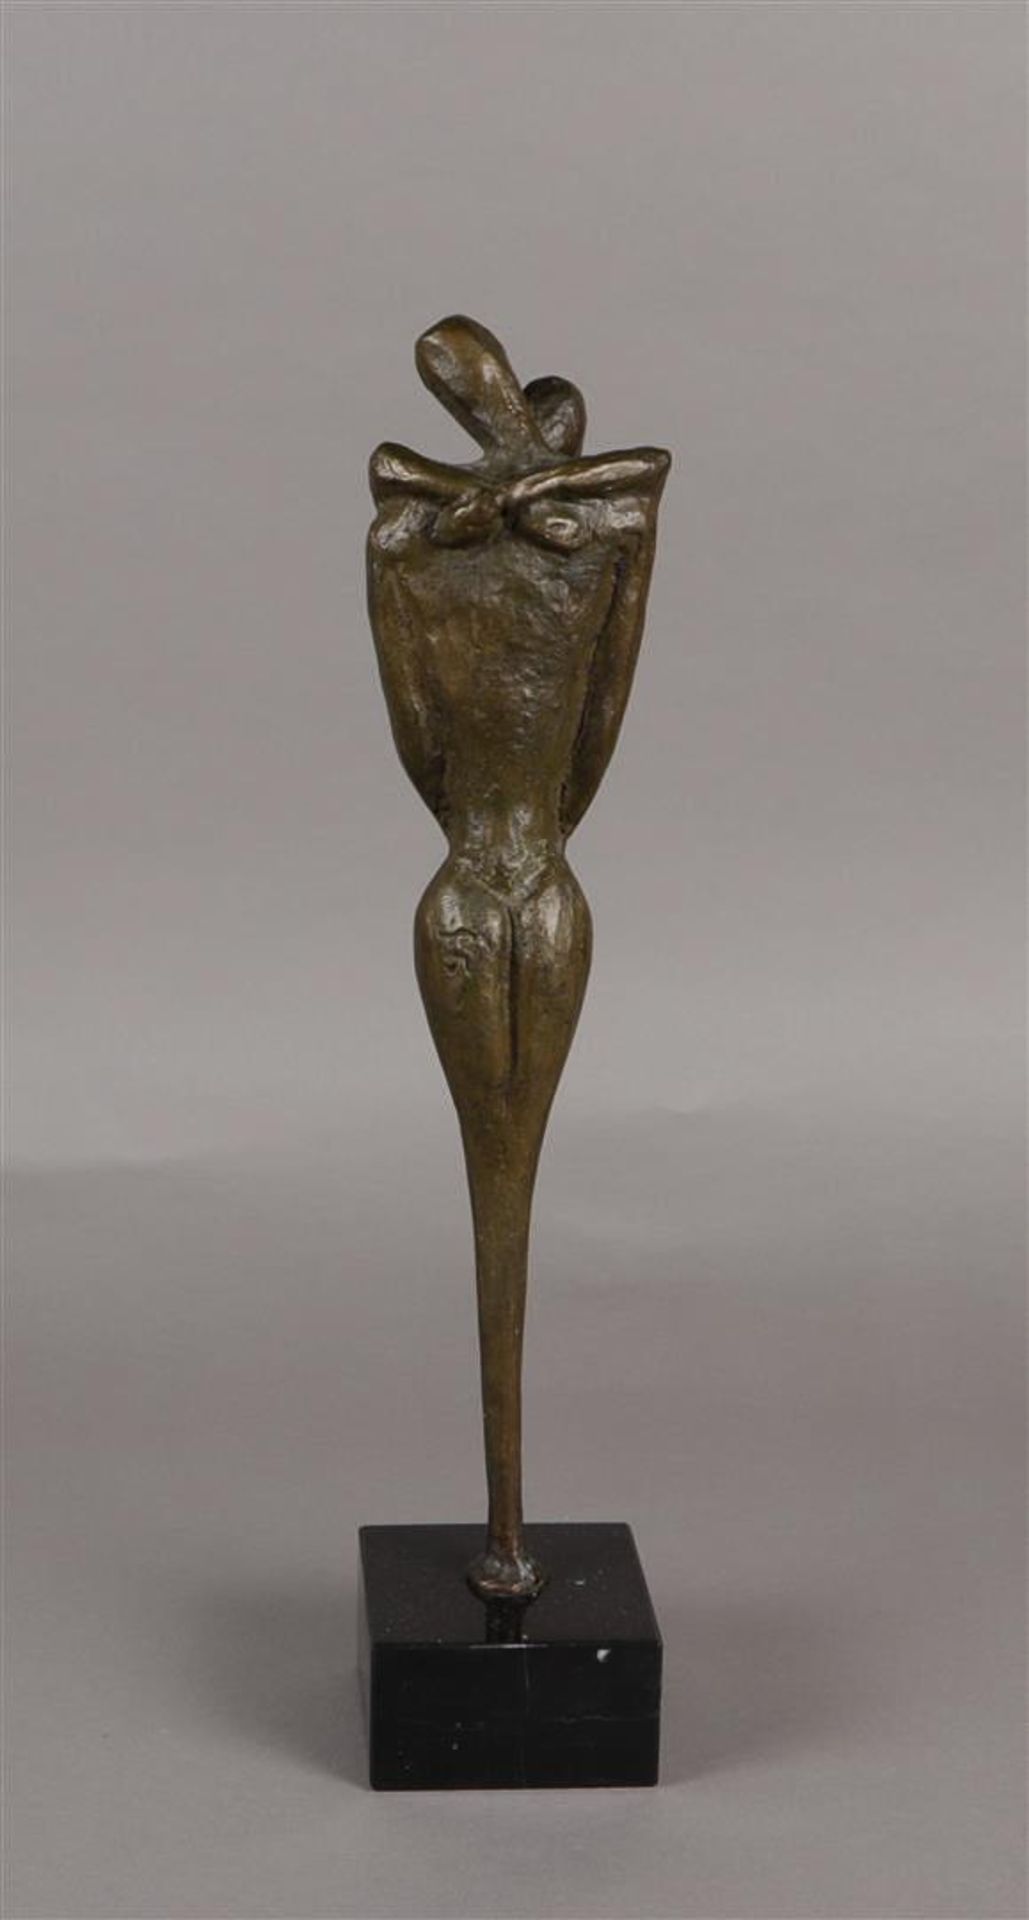 Jos Gielen (born Rotterdam 1952), Embrace, bronze on a honed marble base, including certificate. - Image 2 of 2